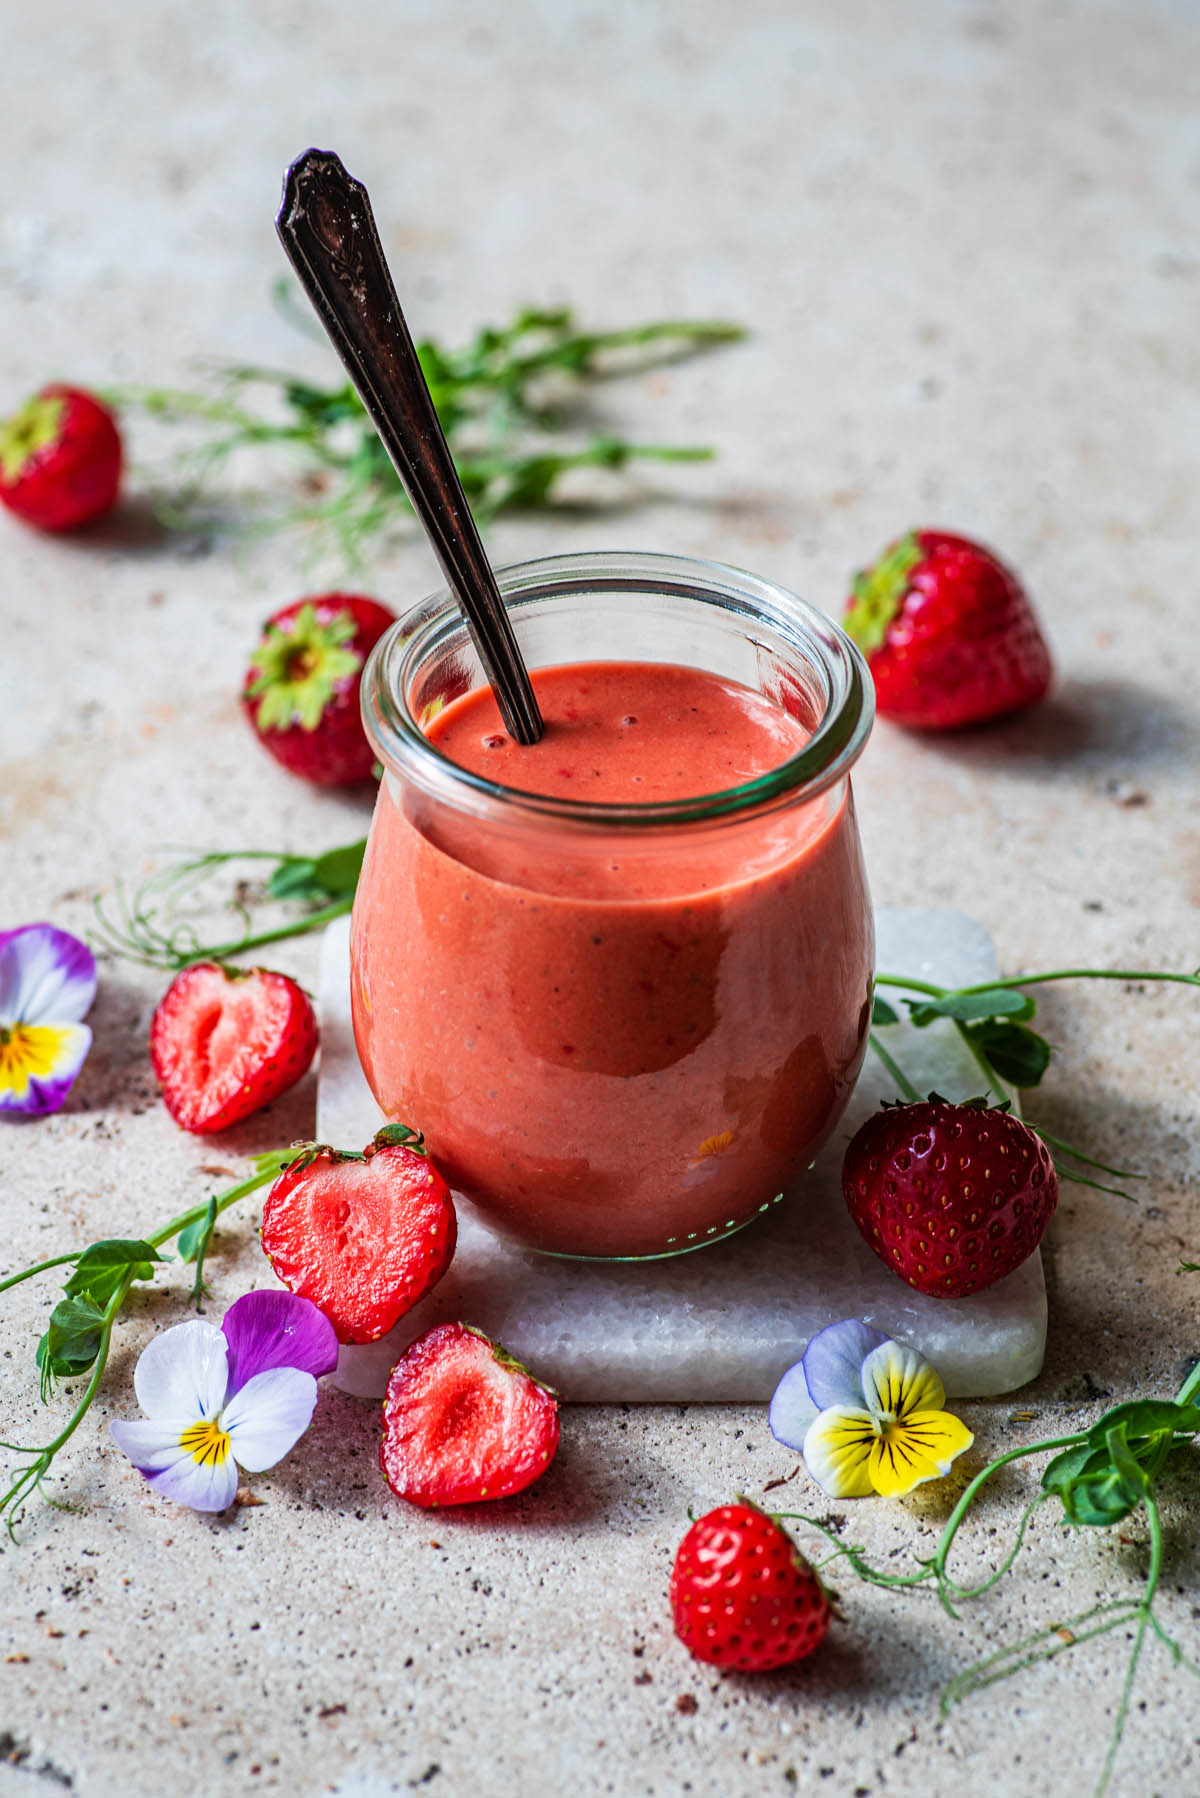 Small jar of vinaigrette with strawberries and flowers.